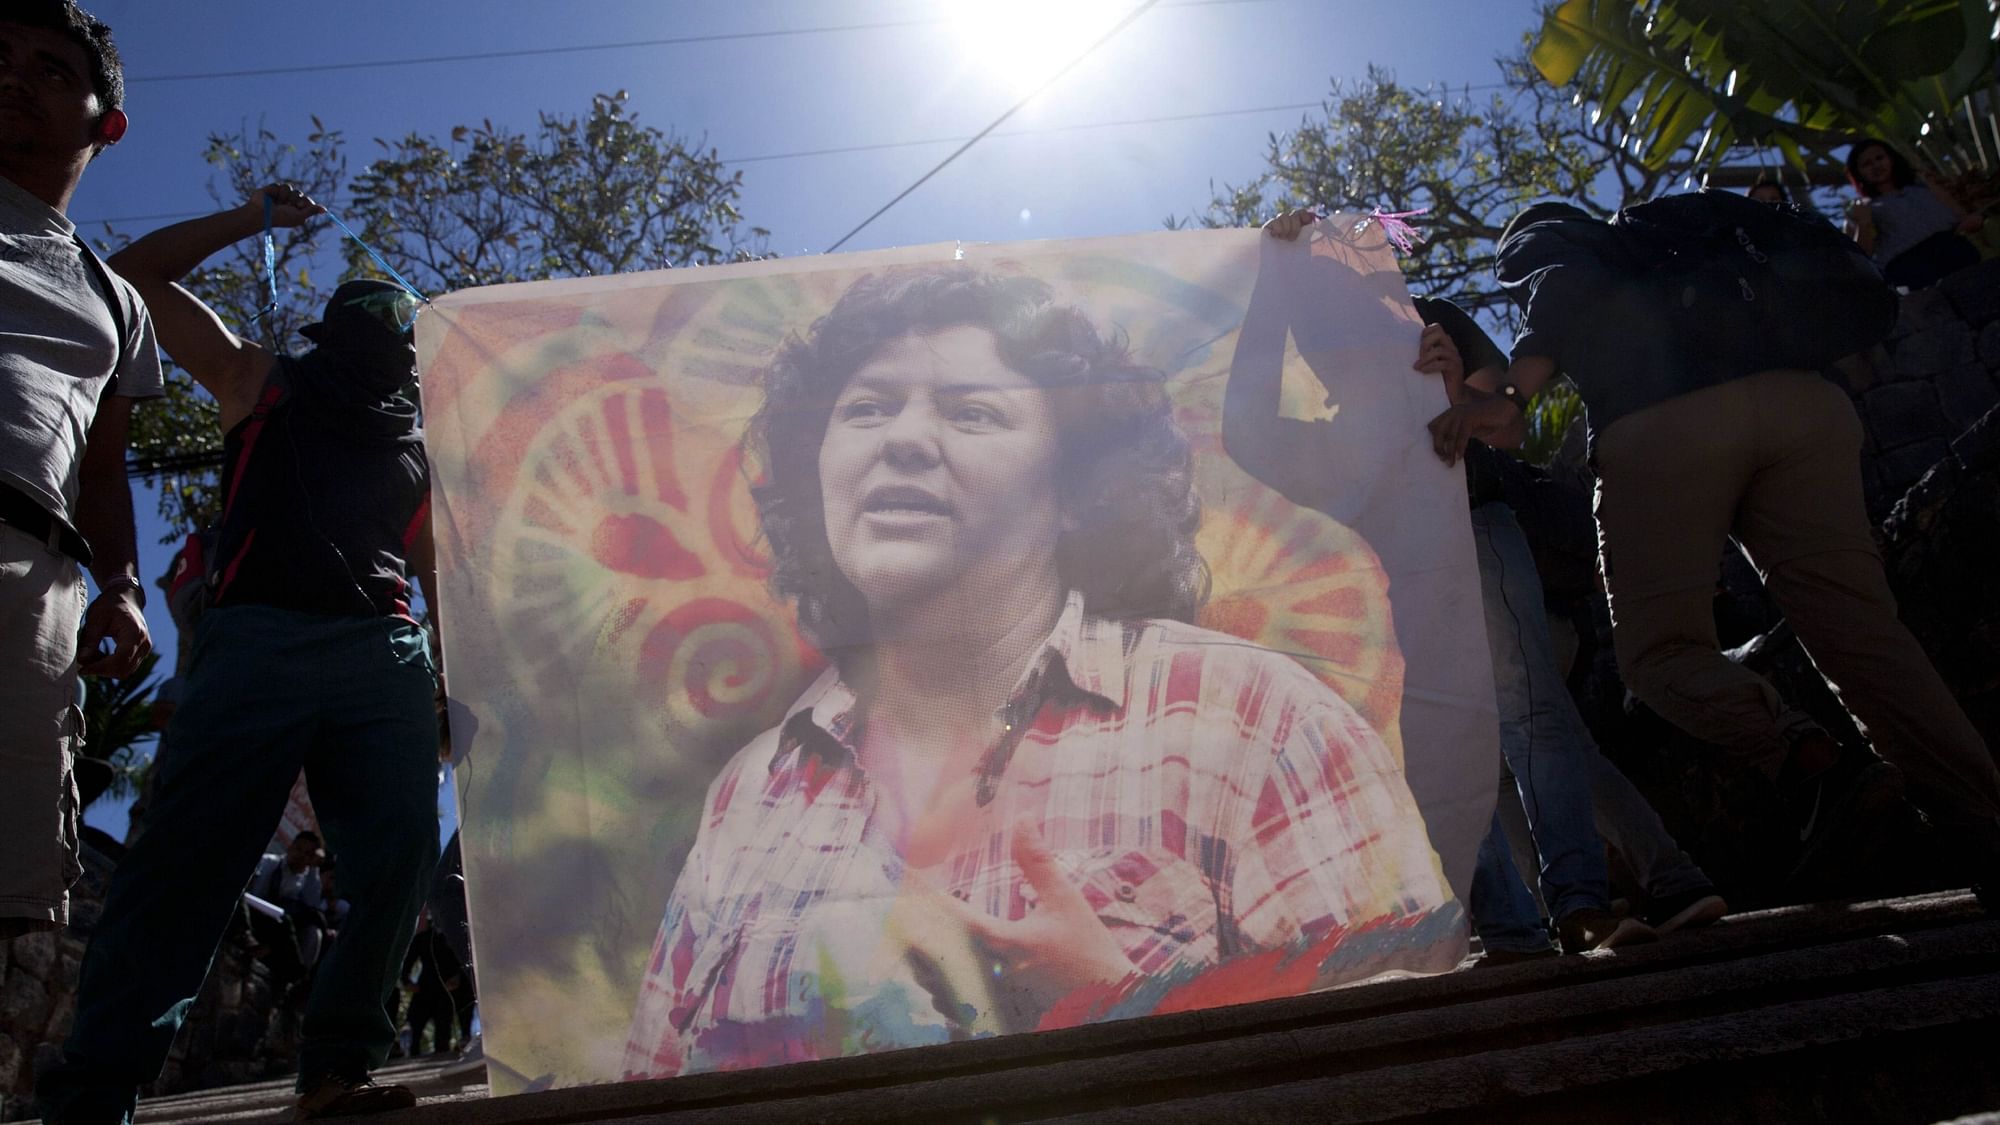 Honduran Indigenous environmentalist Berta Caceres who was killed in March 2016.